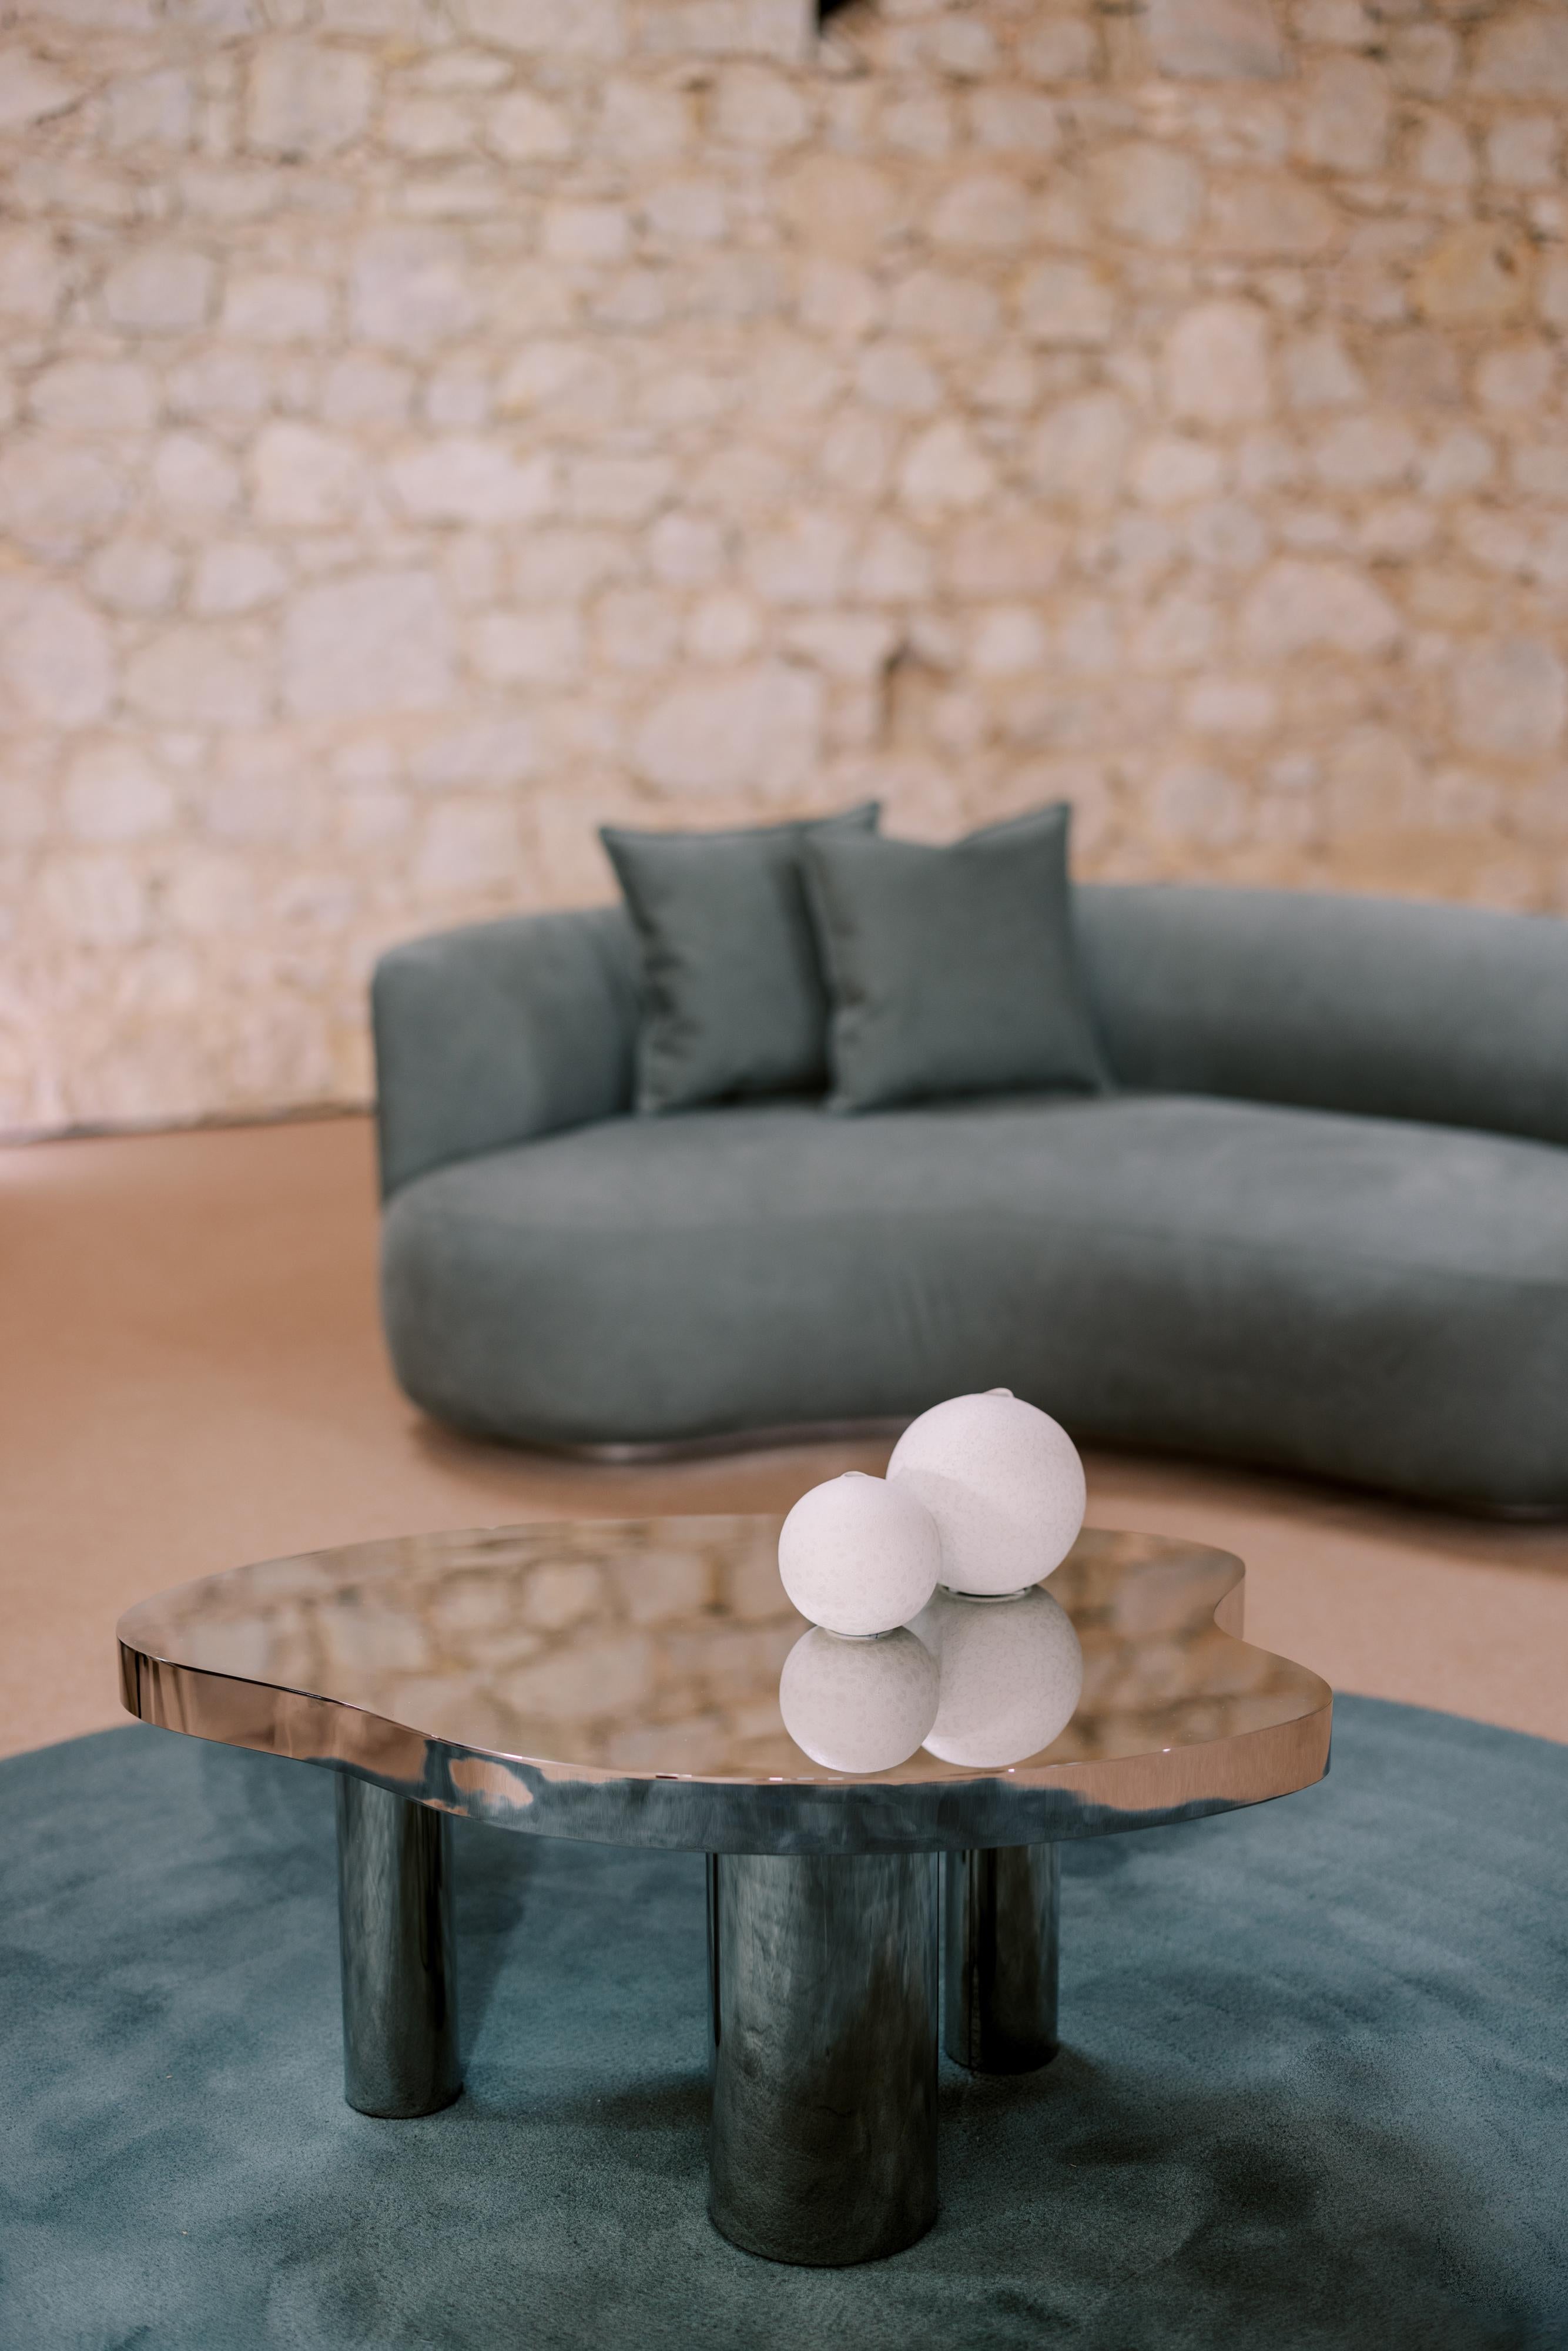 Bordeira coffee table, Contemporary Collection, handcrafted in Portugal - Europe by Greenapple.

Designed by Rute Martins for the Contemporary Collection, the Bordeira modern coffee table was designed to add the essence of nature into the interior